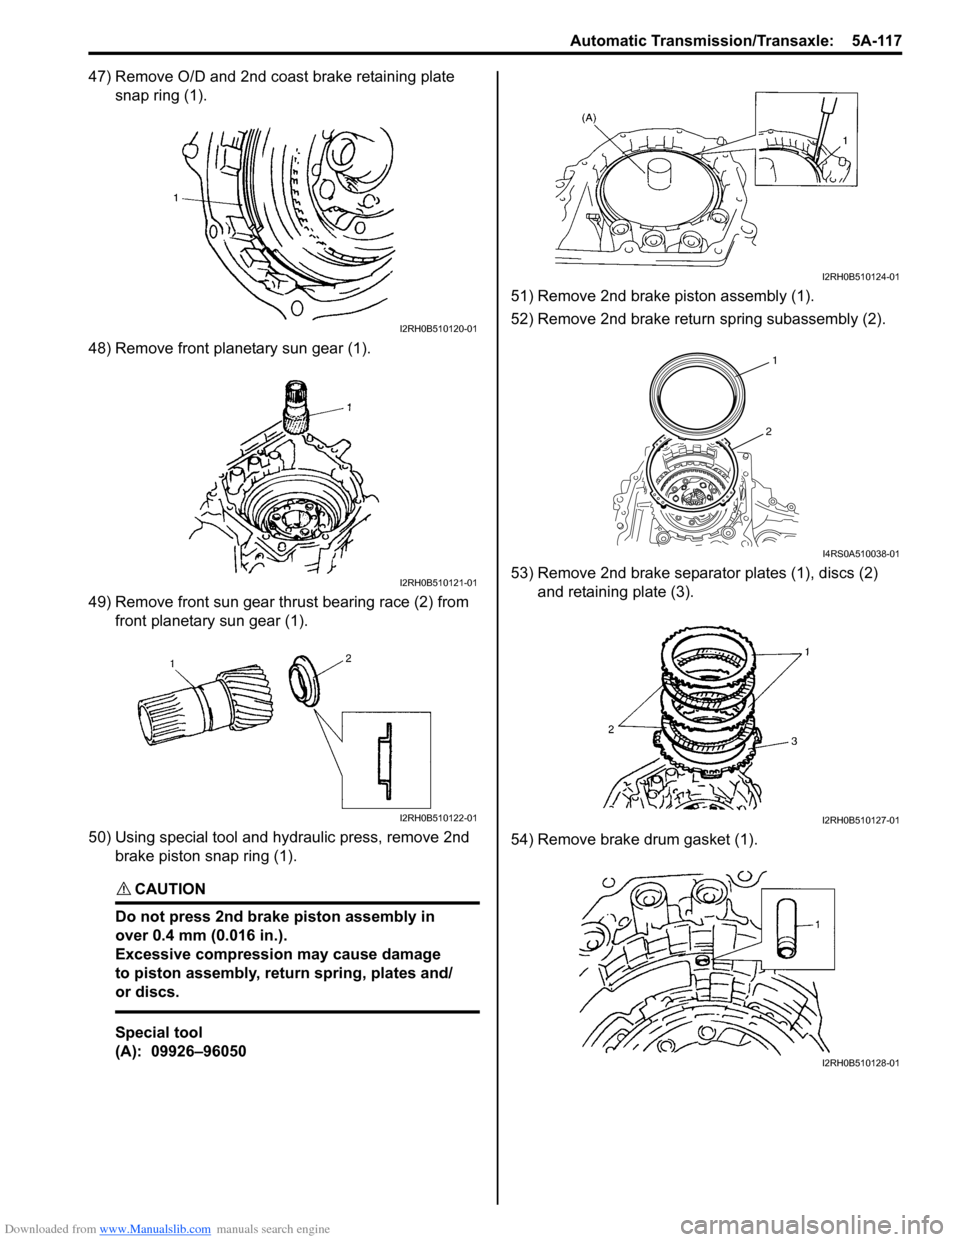 SUZUKI SWIFT 2007 2.G Service Service Manual Downloaded from www.Manualslib.com manuals search engine Automatic Transmission/Transaxle:  5A-117
47) Remove O/D and 2nd coast brake retaining plate snap ring (1).
48) Remove front planetary sun gear